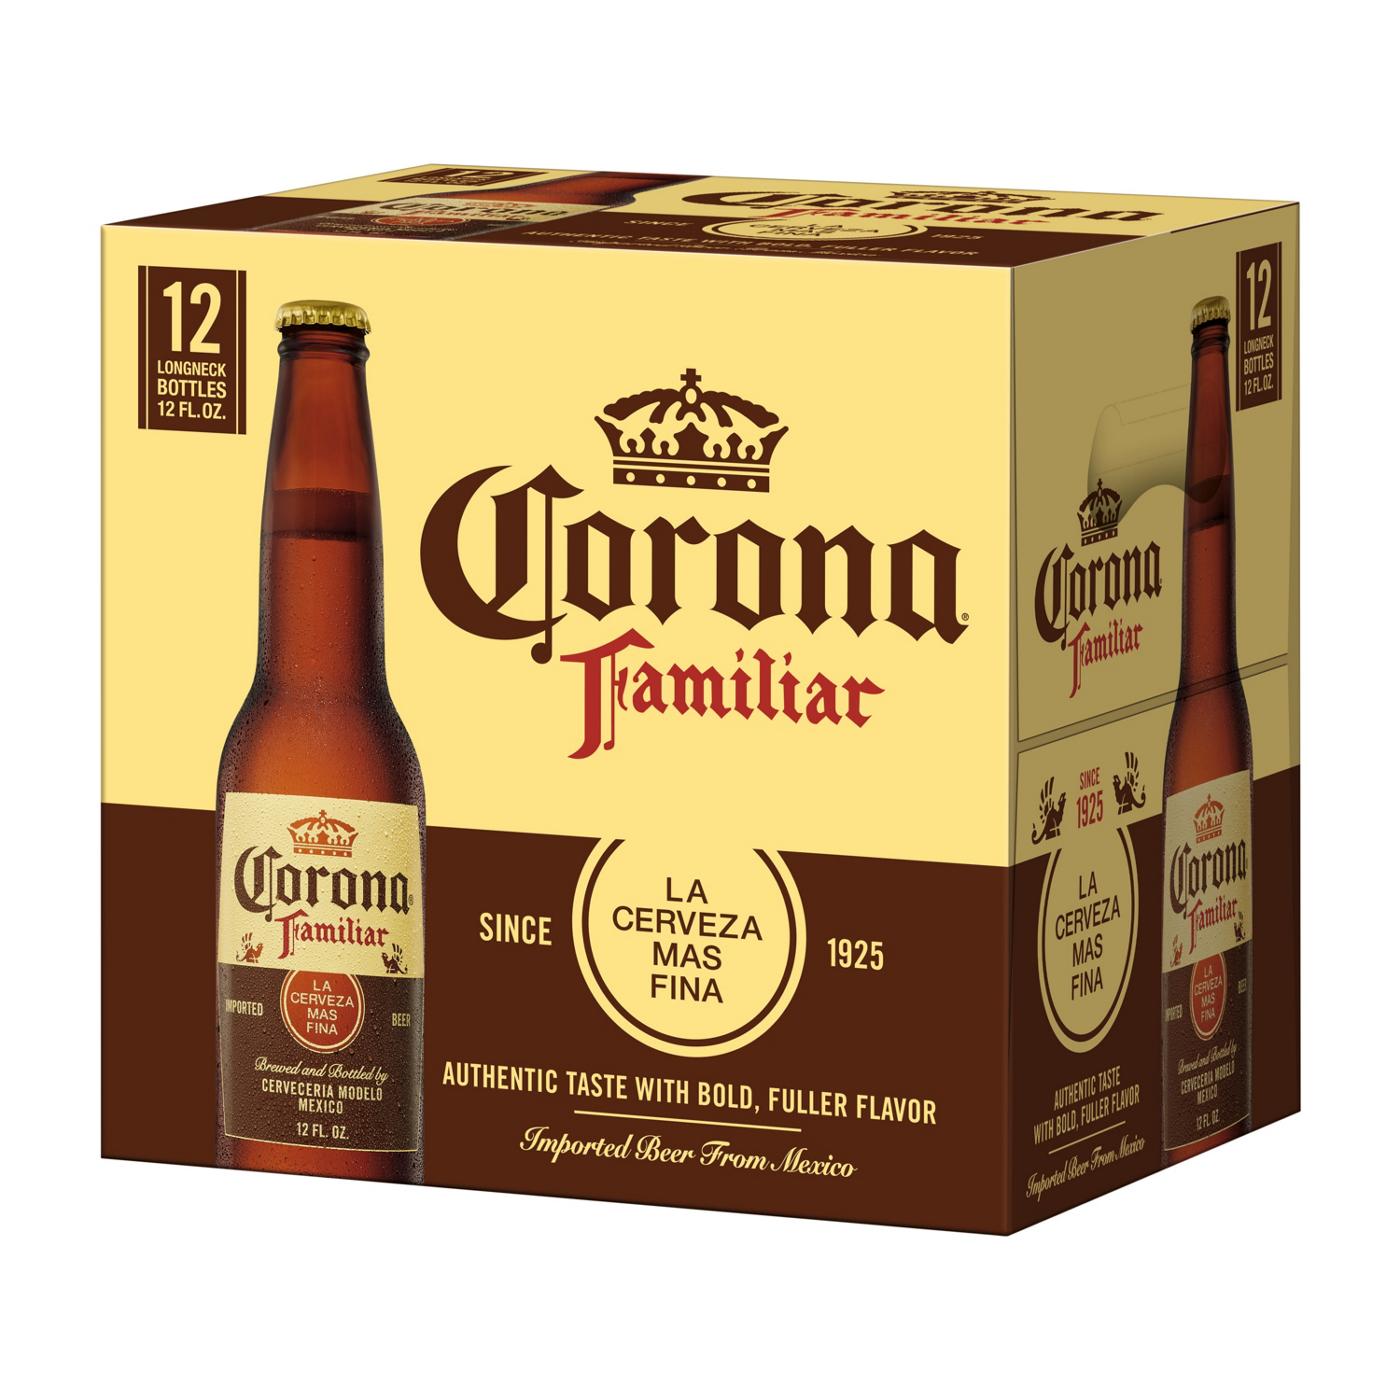 Corona Familiar Mexican Lager Import Beer 12 oz Bottles, 12 pk; image 4 of 10